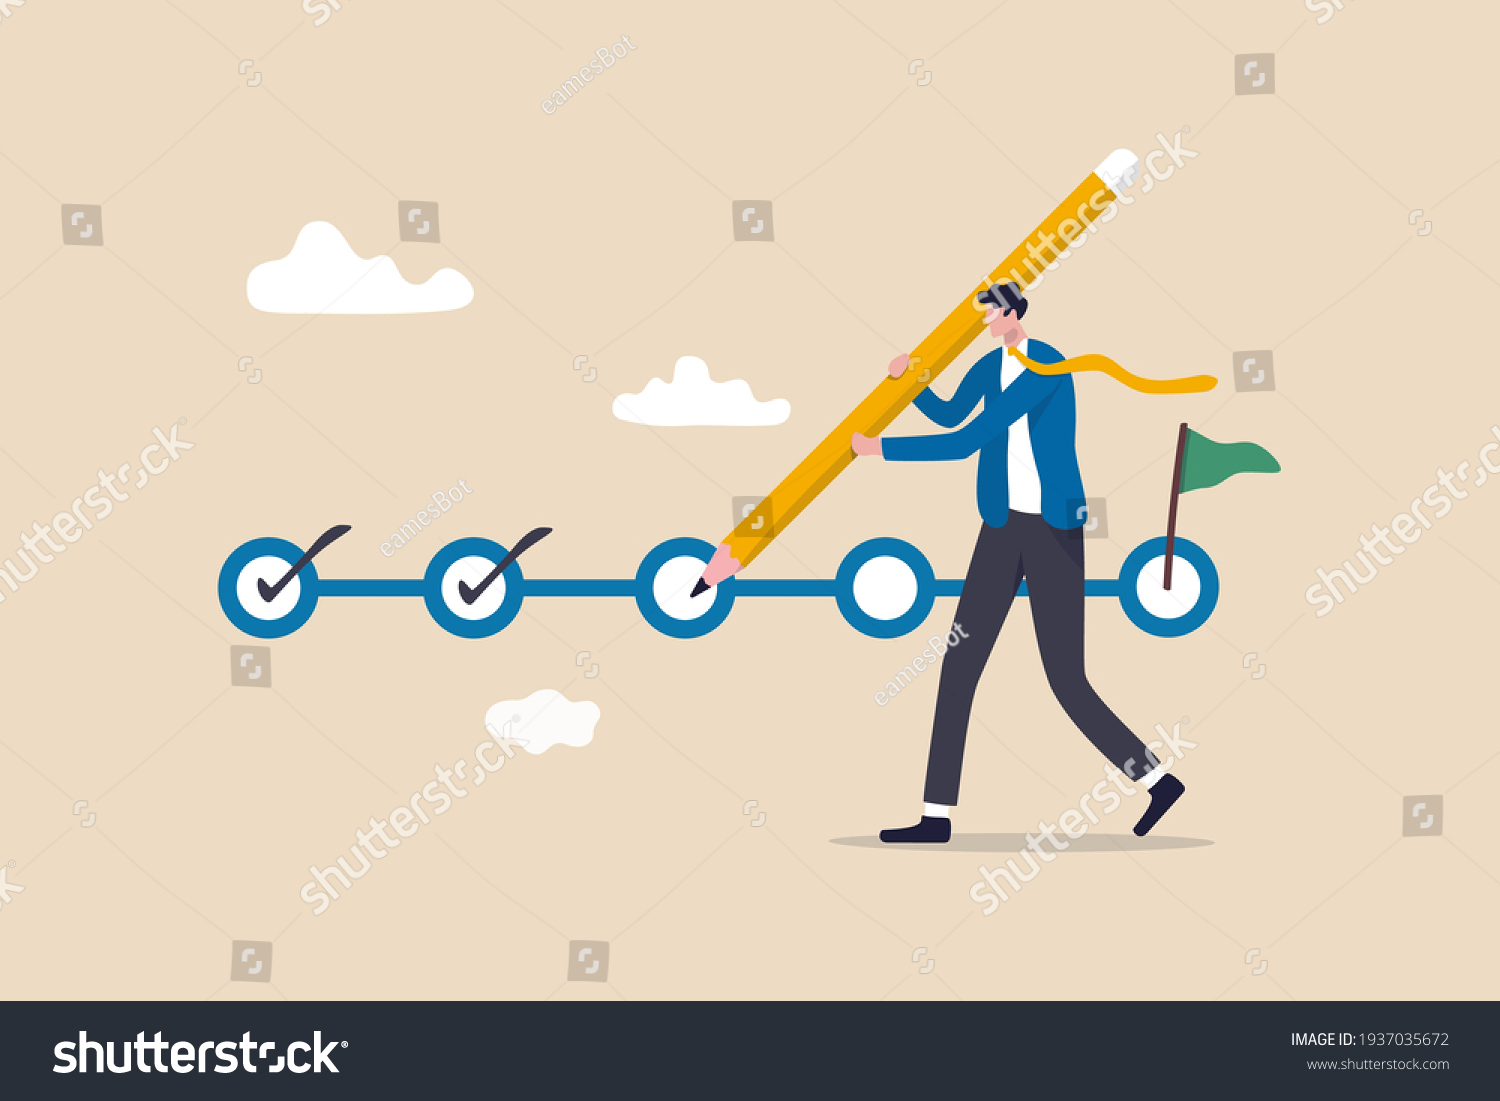 Project tracking, goal tracker, task completion or checklist to remind project progress concept, businessman project manager holding big pencil to check completed tasks in project management timeline. #1937035672